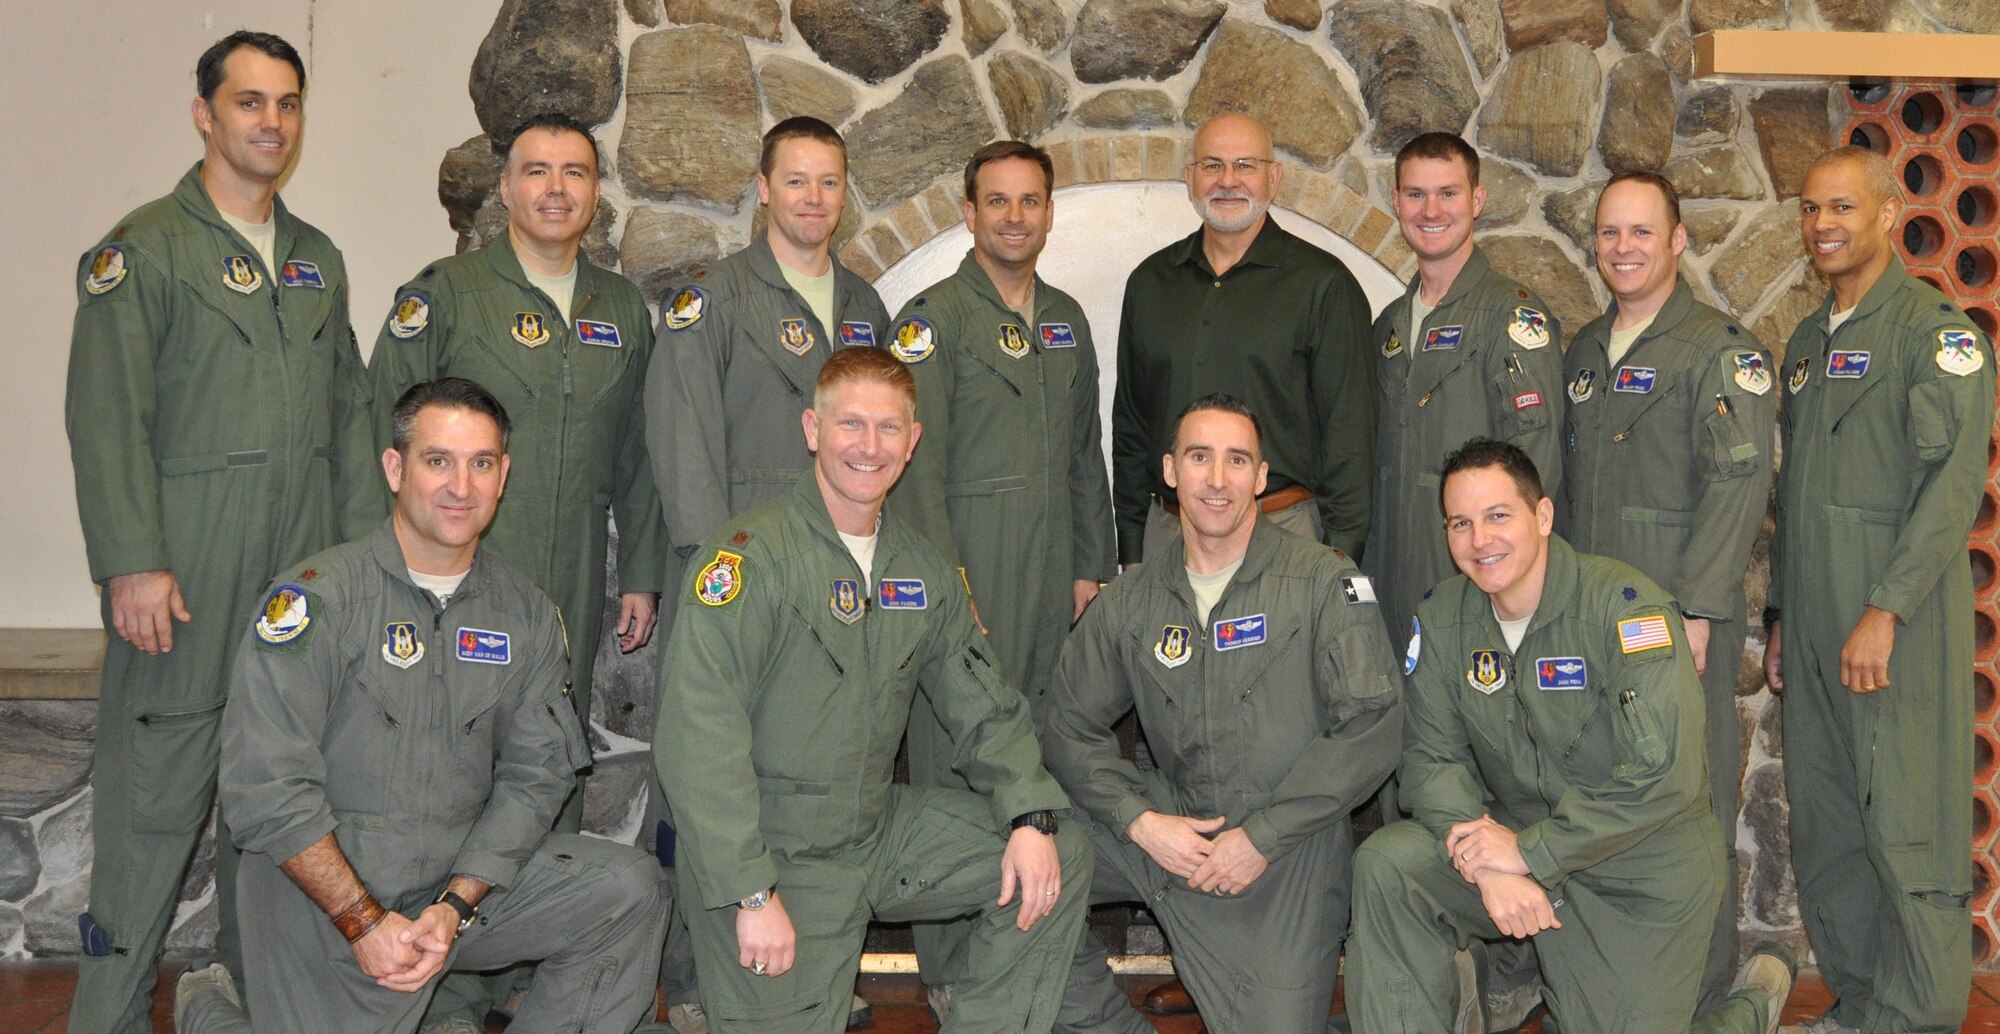 Dr. Gordon Curphy, leadership expert (center), poses for a group photo with 39th Flying Training Squadron leadership at the JBSA-Randolph Parr Officer’s Club, Jan. 18, after his presentation to the group. (Photo by Janis El Shabazz)

